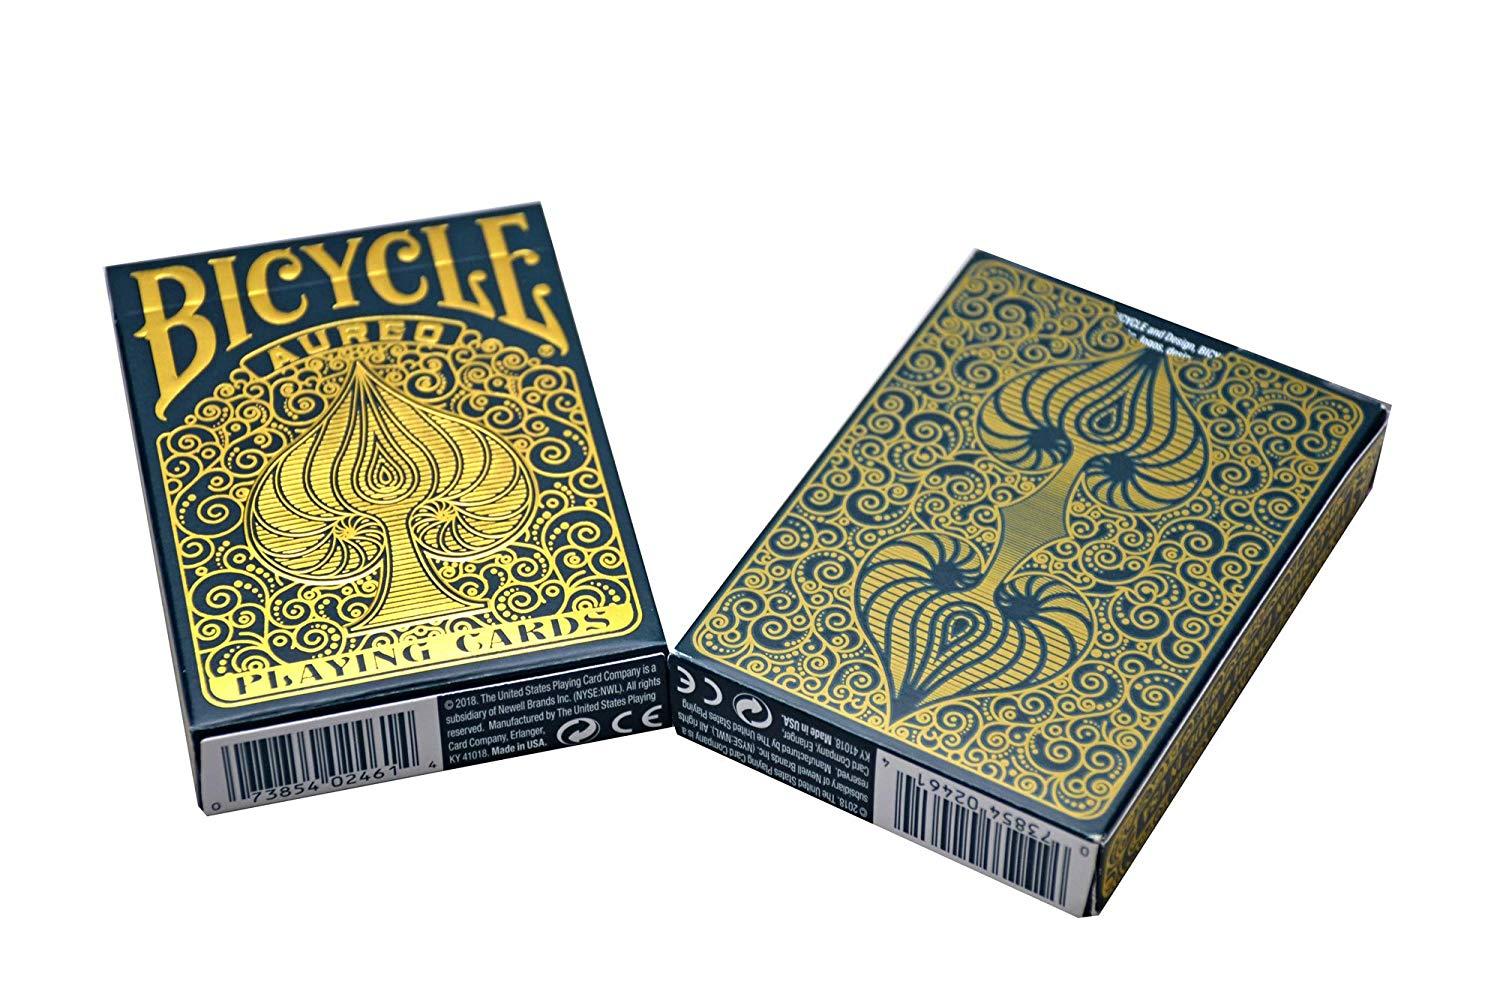 aureo bicycle playing cards